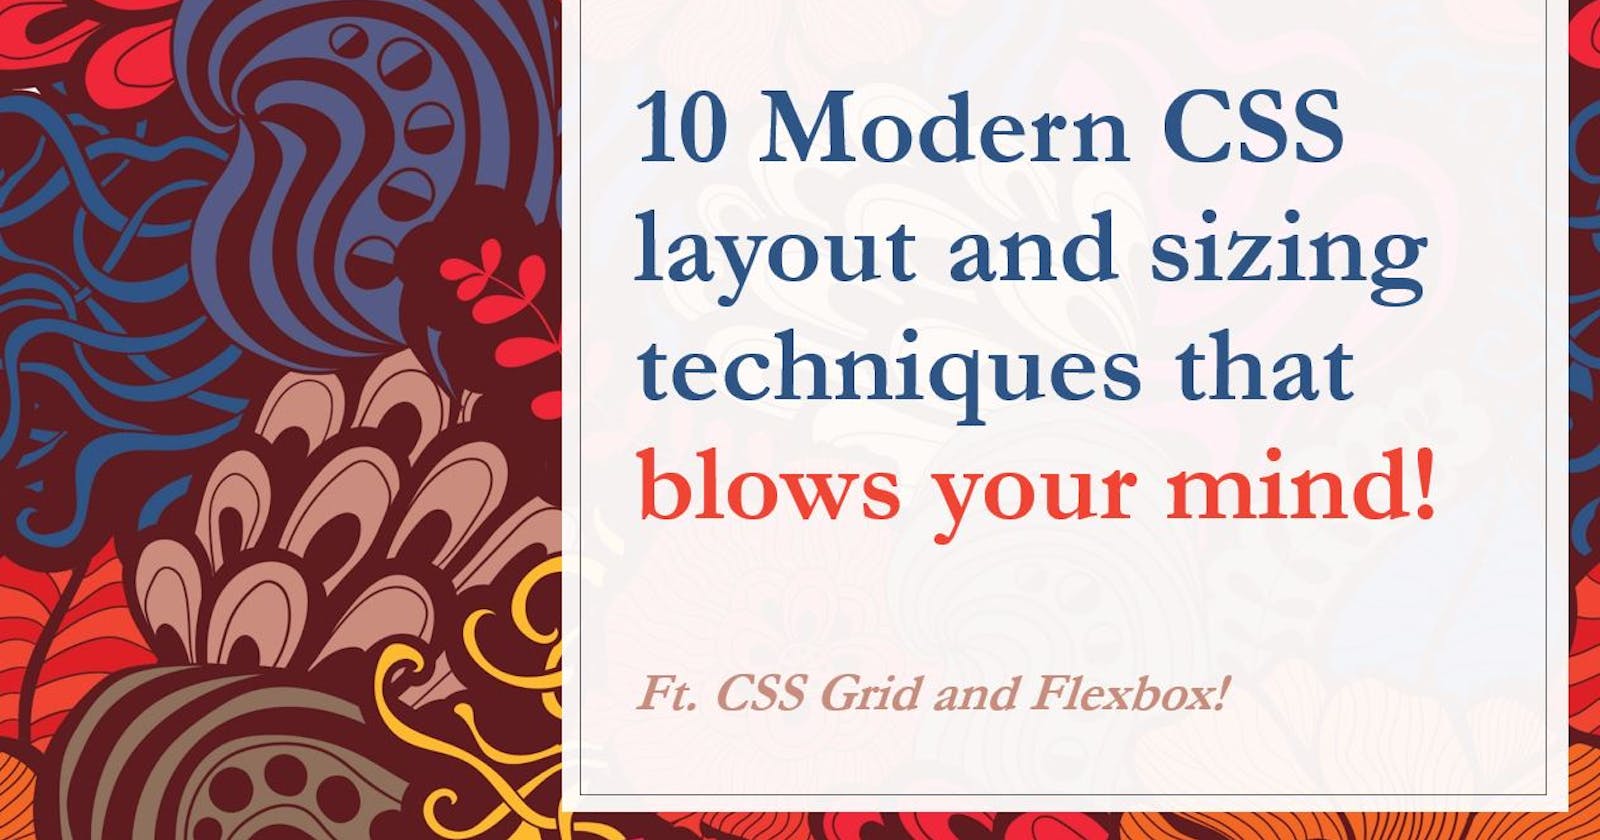 10 Modern CSS layout and sizing techniques that blows your mind!